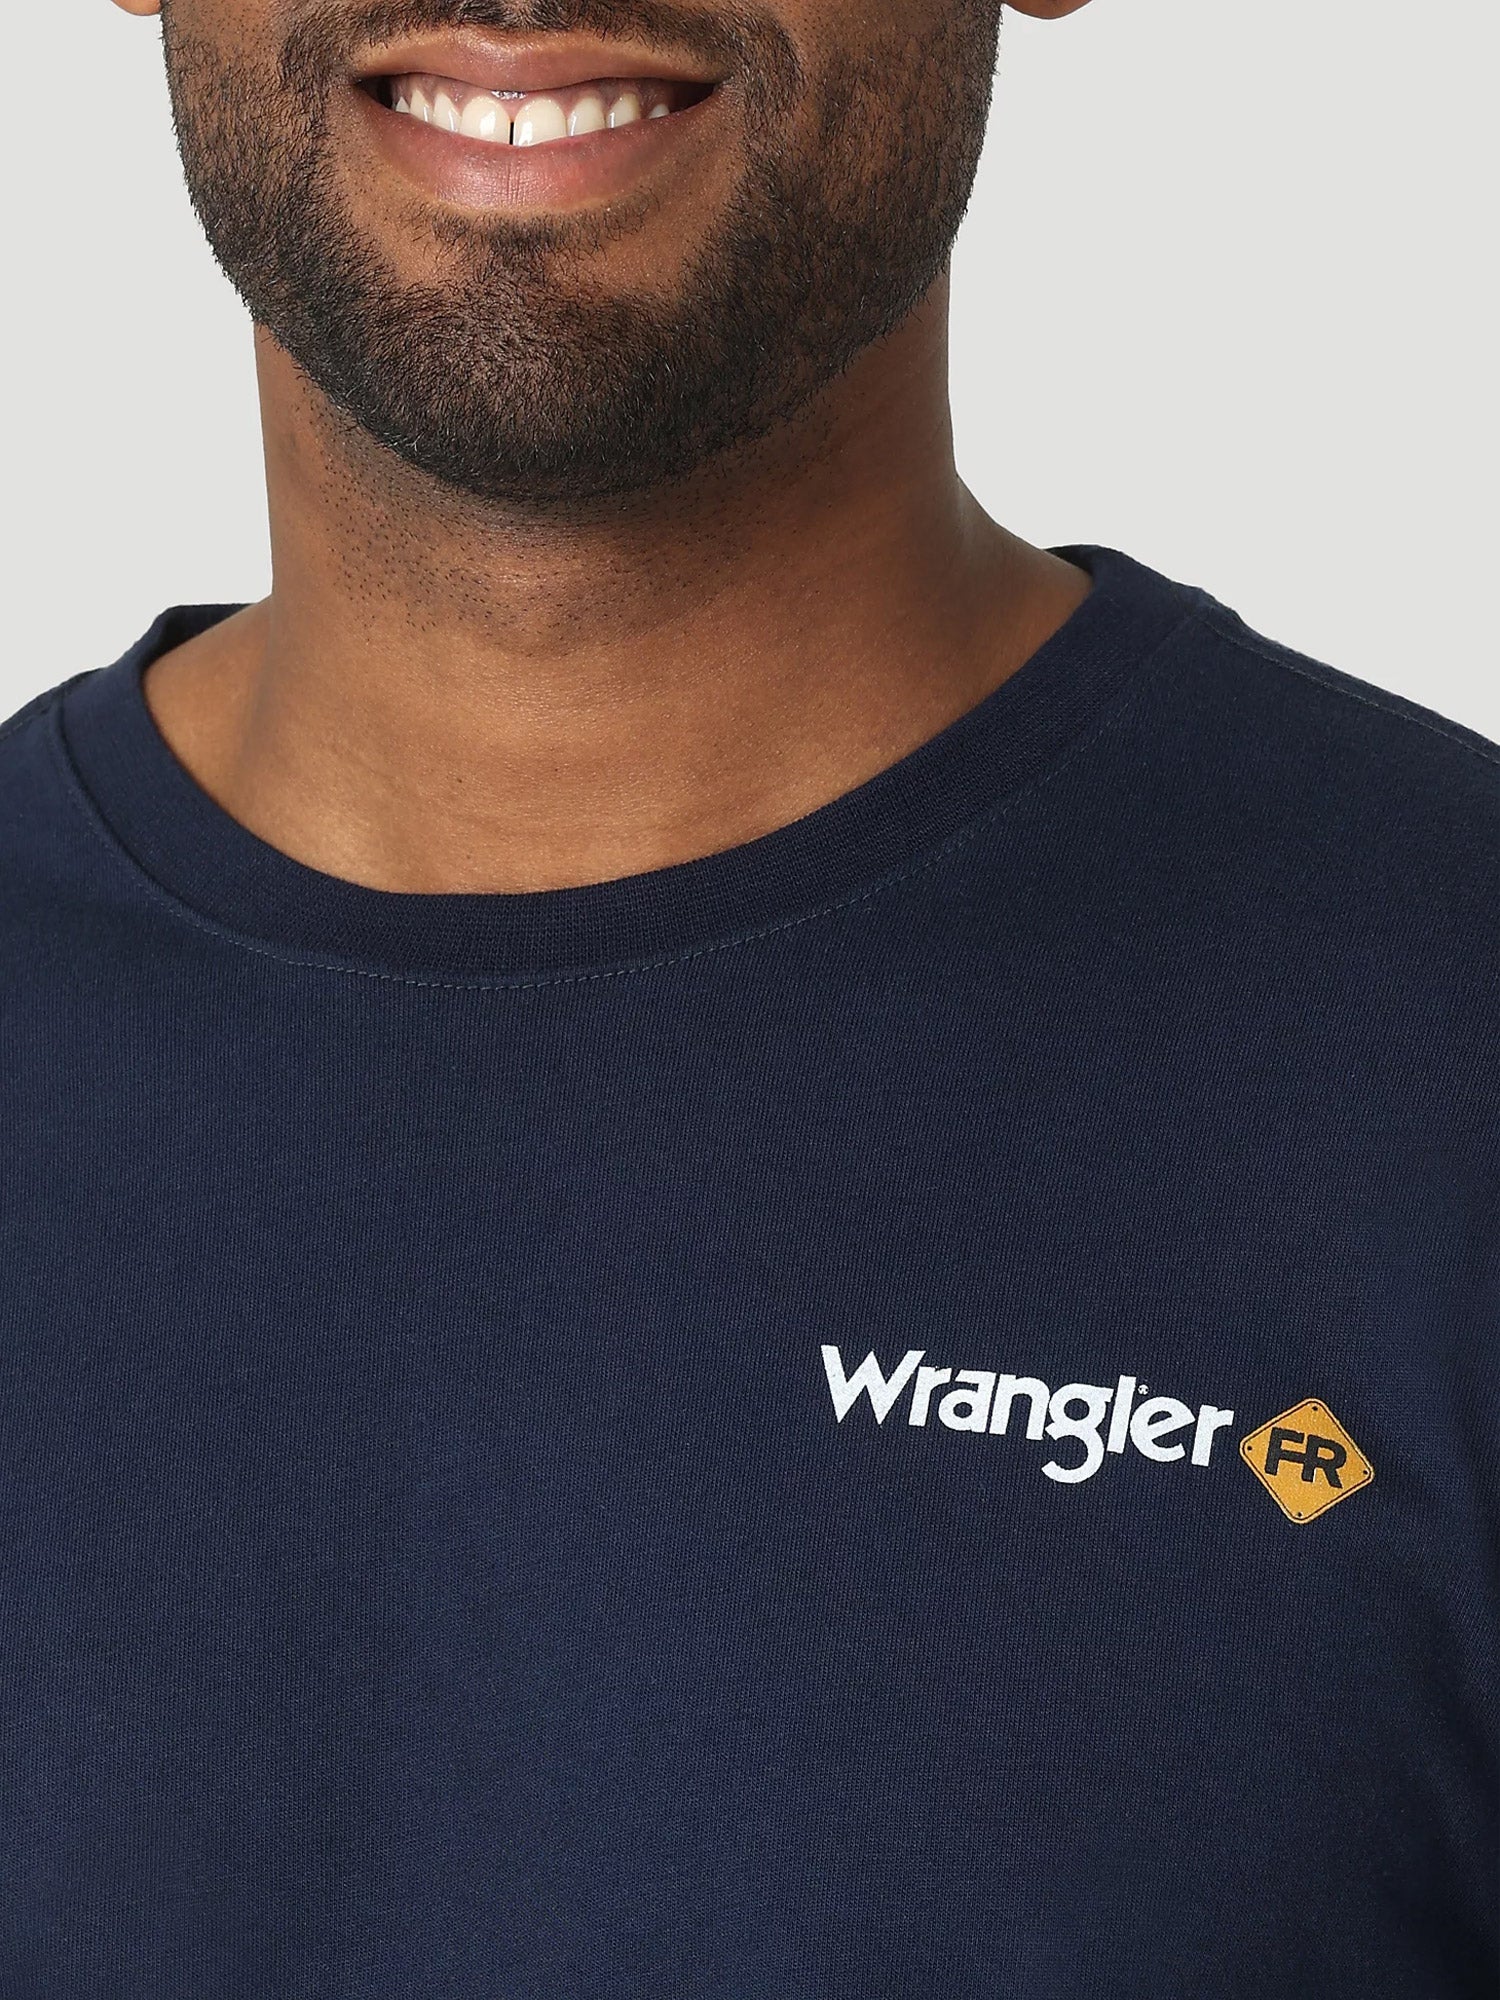 Wrangler 112317761 Flame Resistant Flag Graphic Long Sleeve T-Shirt in Navy Front Detail View